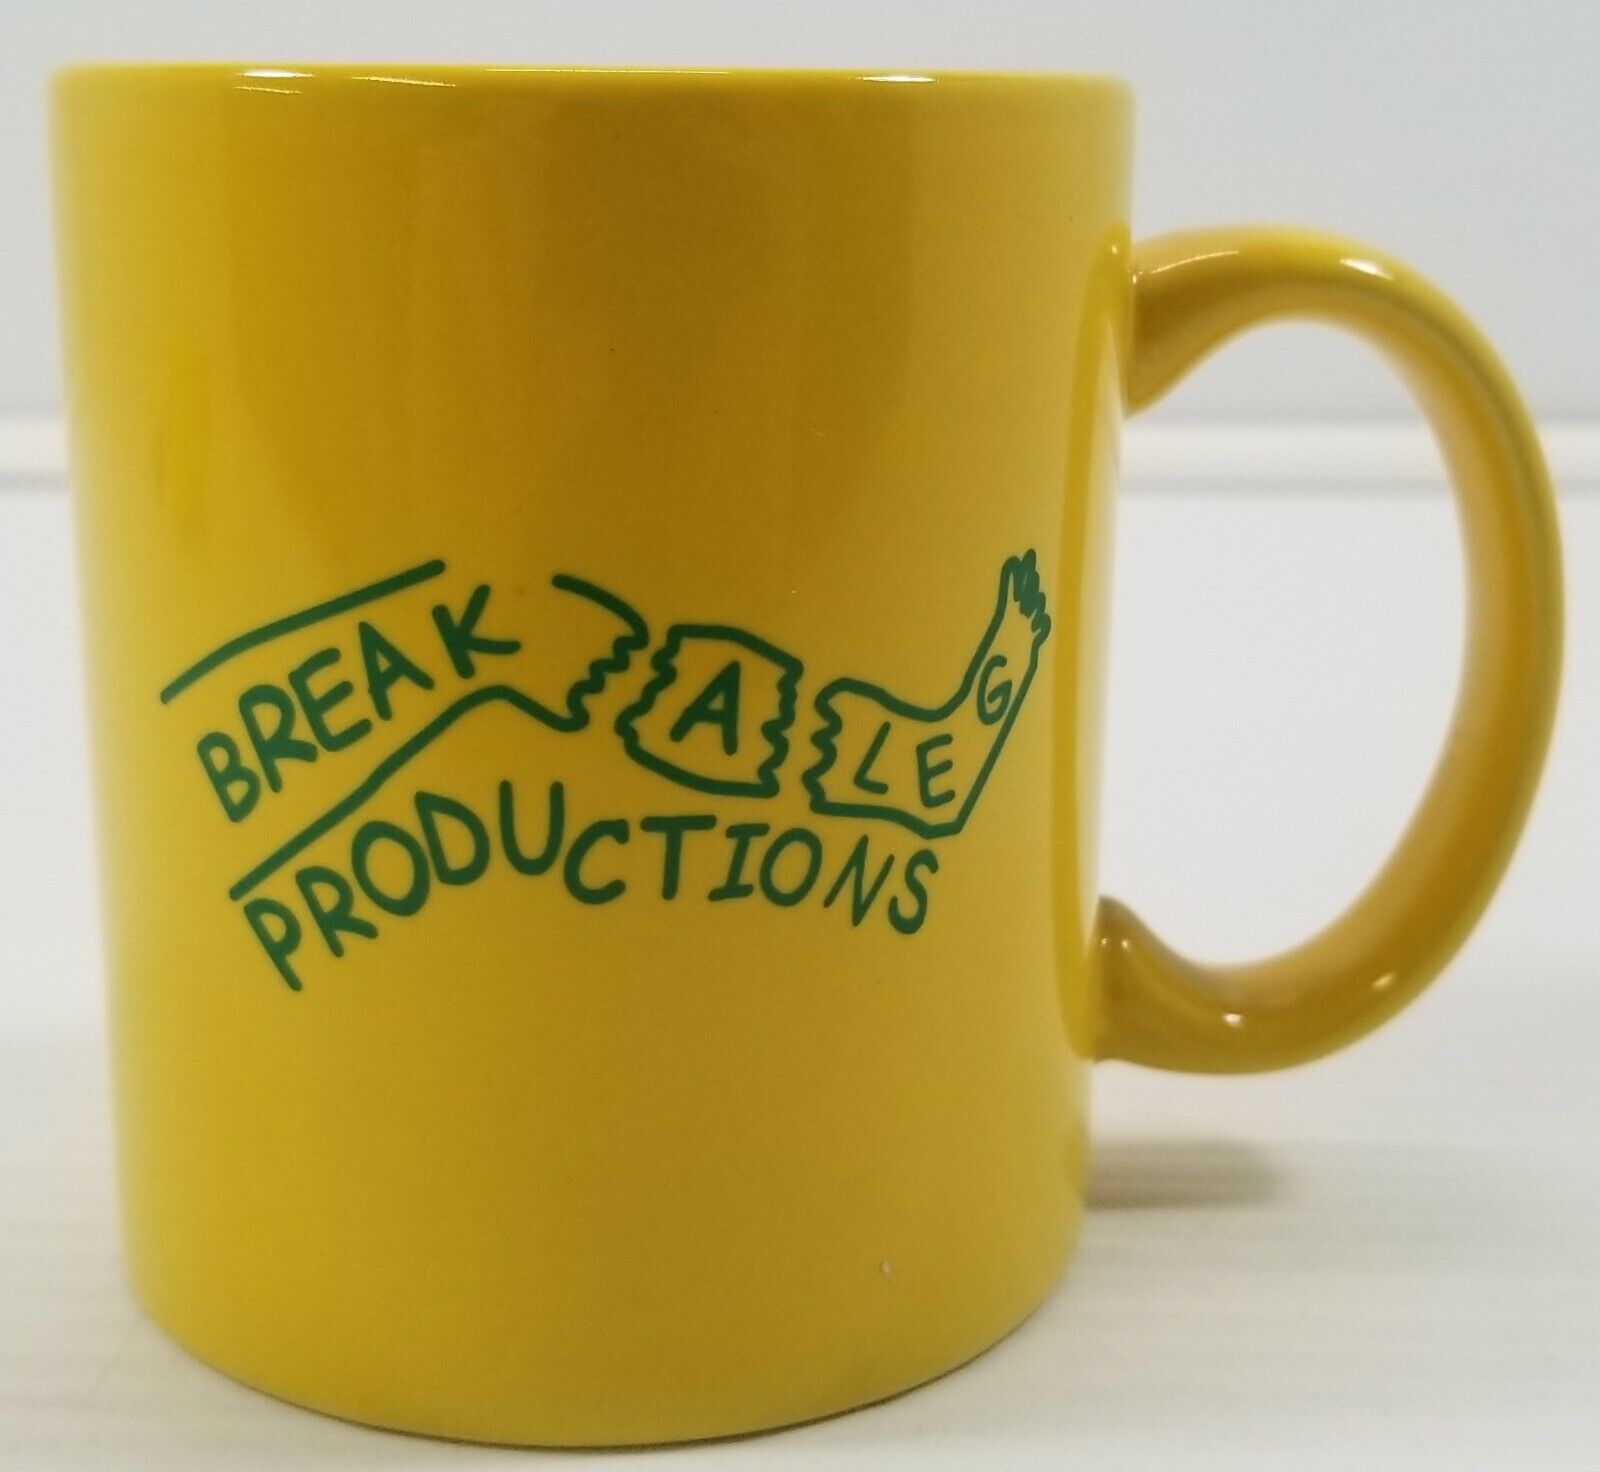 Primary image for M) Break a Leg Productions New York Yellow Coffee Mug